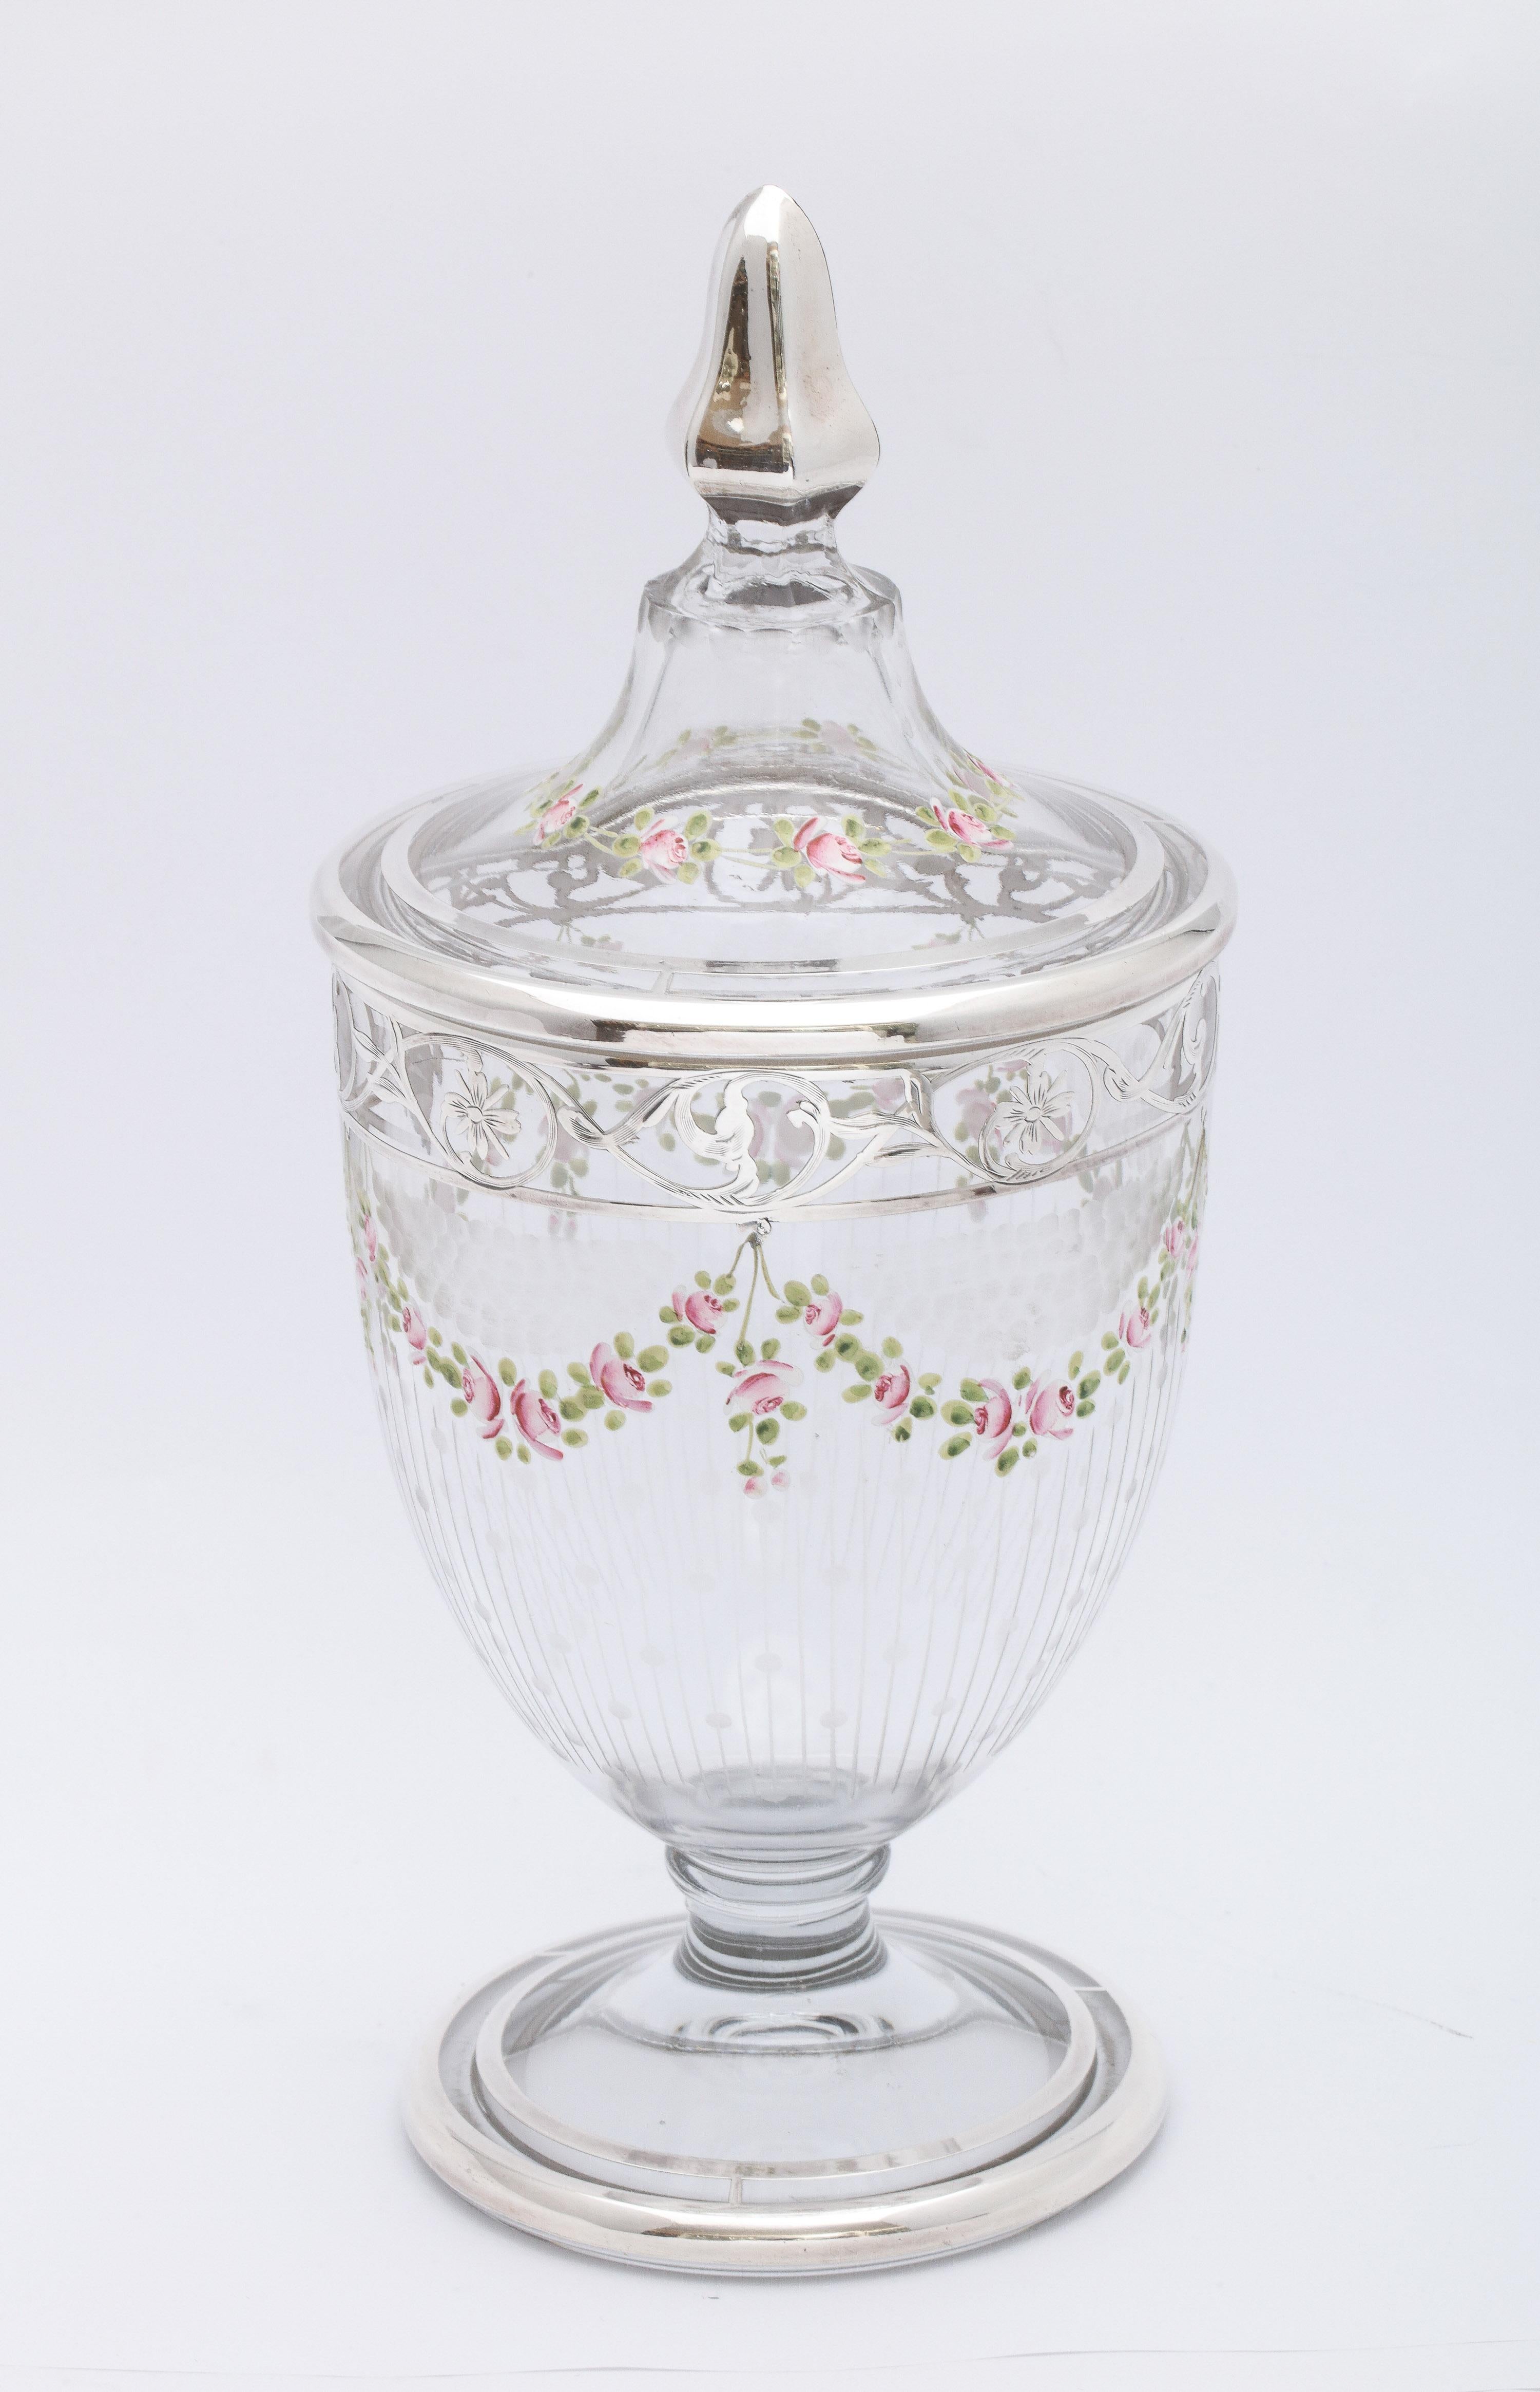 Edwardian Period Sterling Silver-Overlay and Enamel Sweetmeats Jar For Sale 4